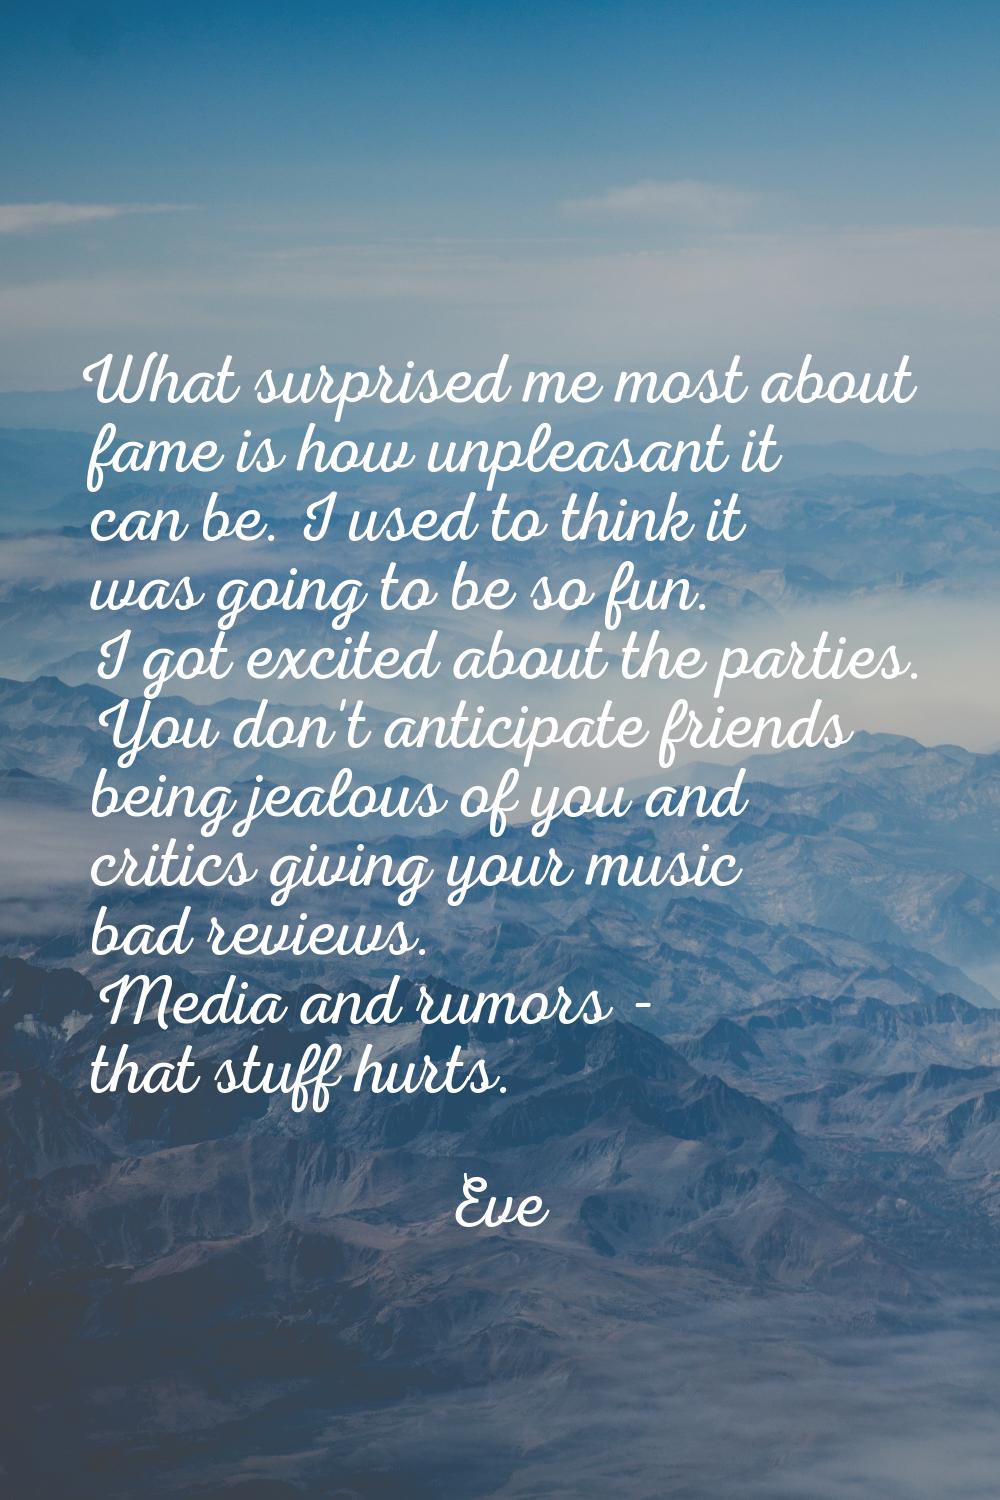 What surprised me most about fame is how unpleasant it can be. I used to think it was going to be s